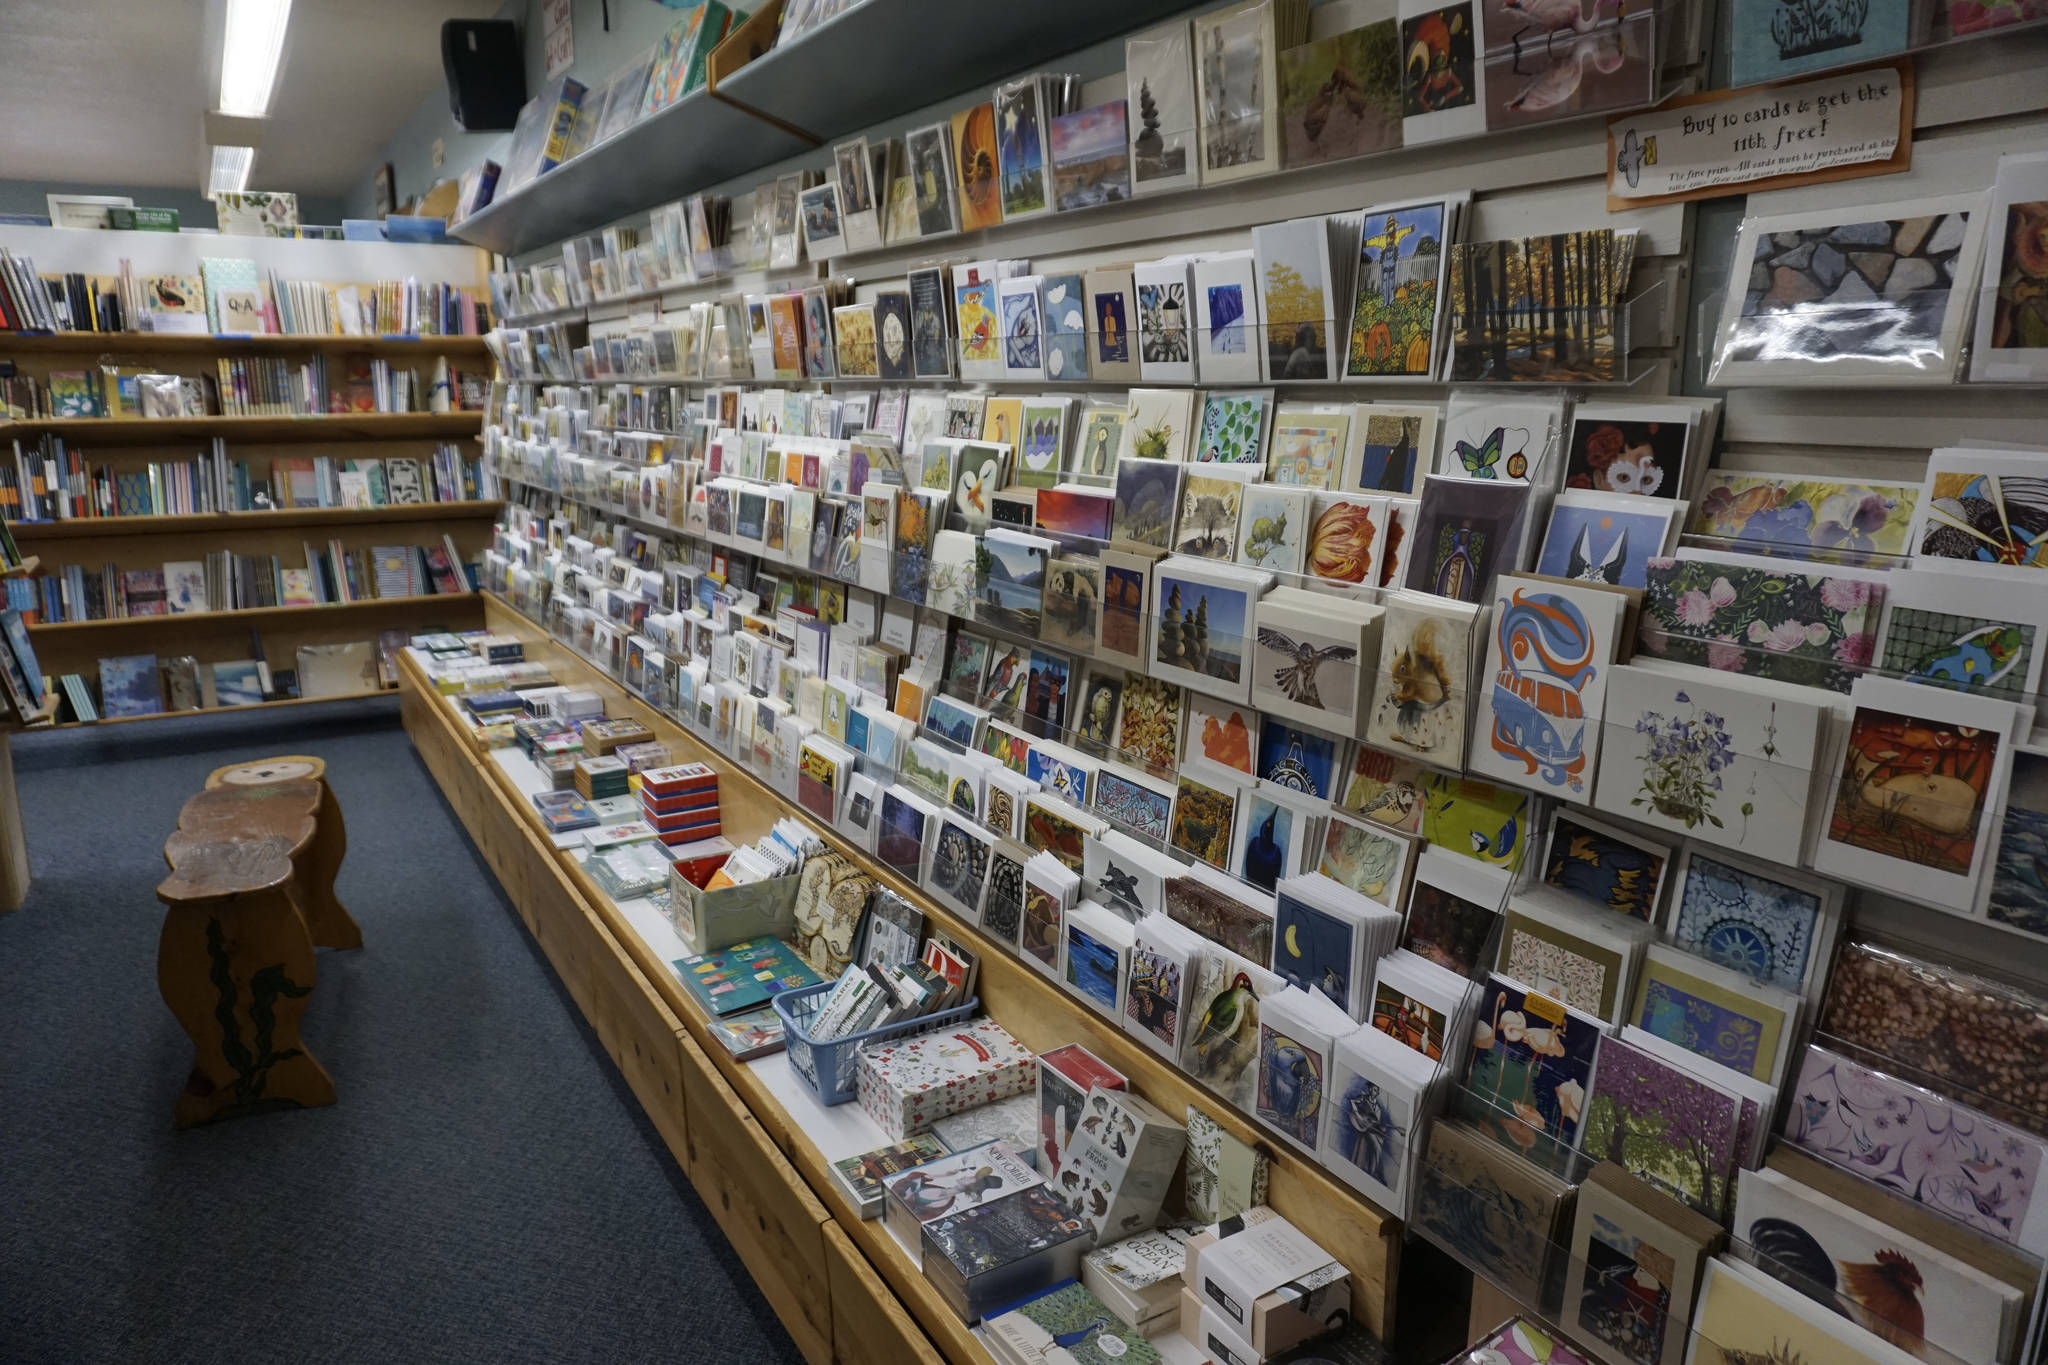 The card section at the Homer Bookstore on Oct. 29, 2018, in Homer, Alaska. The store features many cards by Alaska and local artists. (Photo by Michael Armstrong/Homer News)